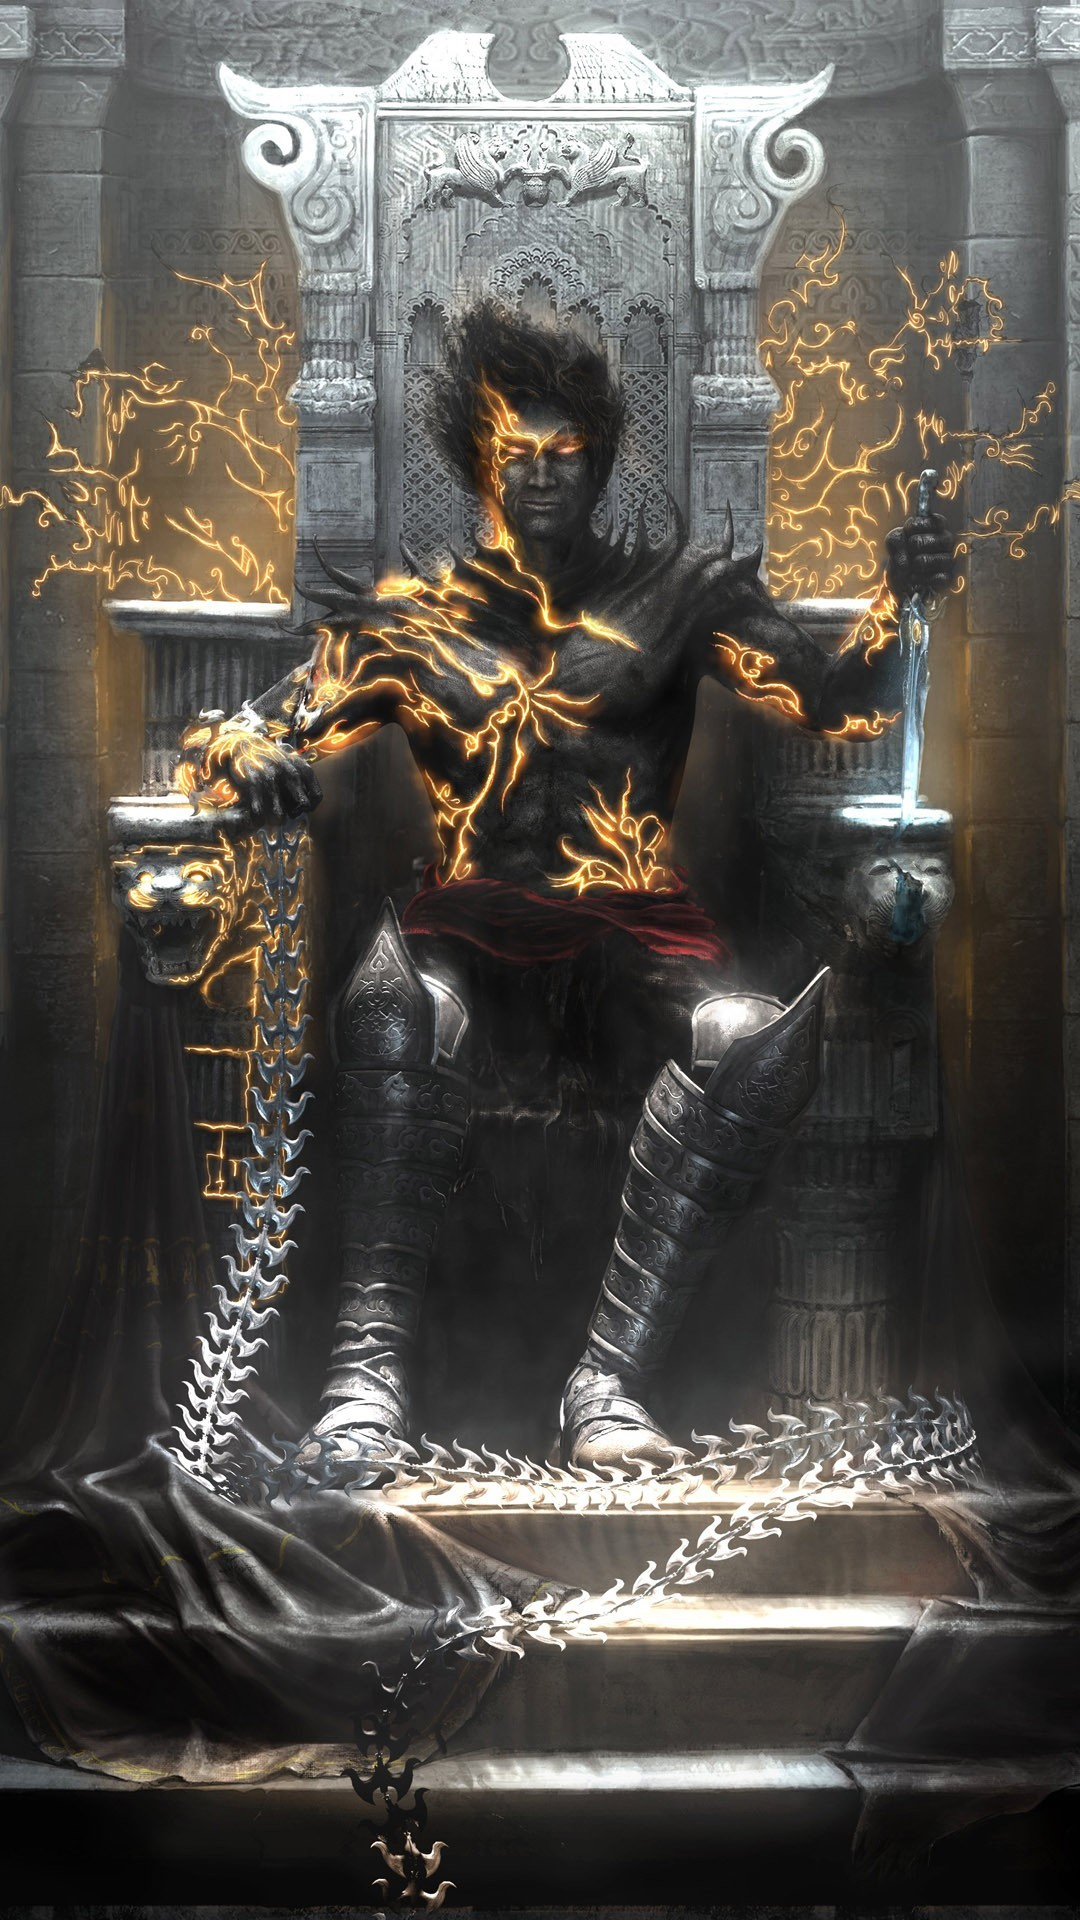 1080x1920 Free download Free download Prince of Persia The Two Thrones Mobile Wallpaper [] for your Desktop, Mobile \u0026 Tablet | Explore 26+ Prince of Persia iPhone Wallpapers | Prince Of Persia Wallpaper